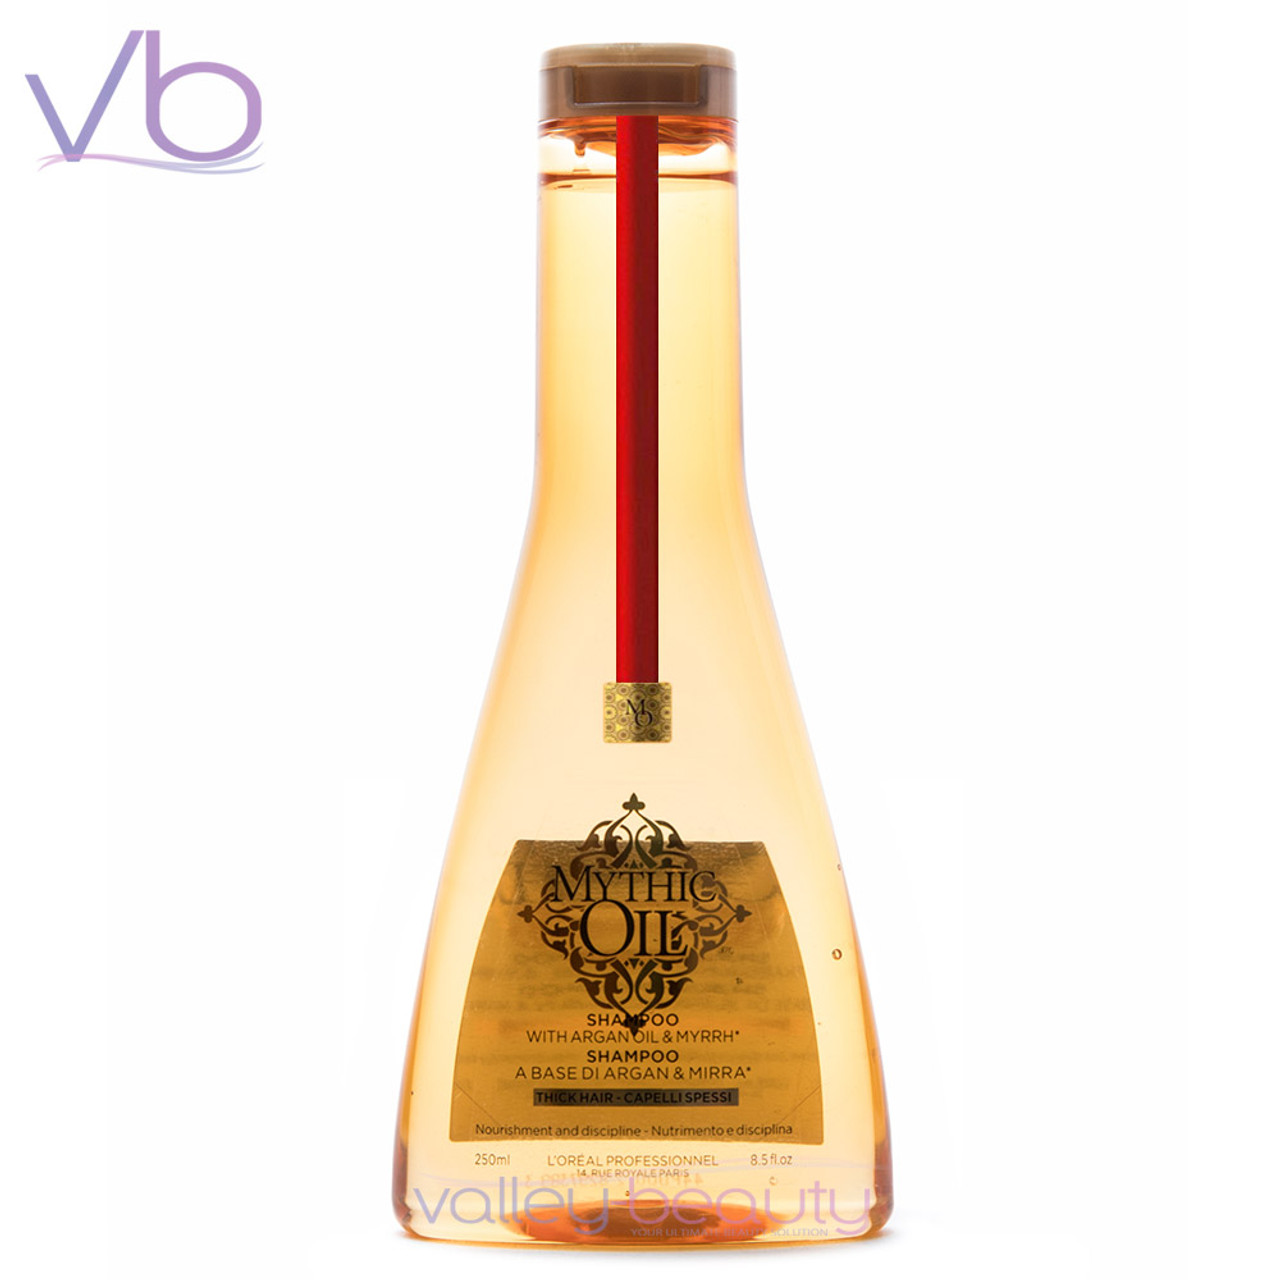 L'Oreal Mythic Oil Shampoo For Thick Hair